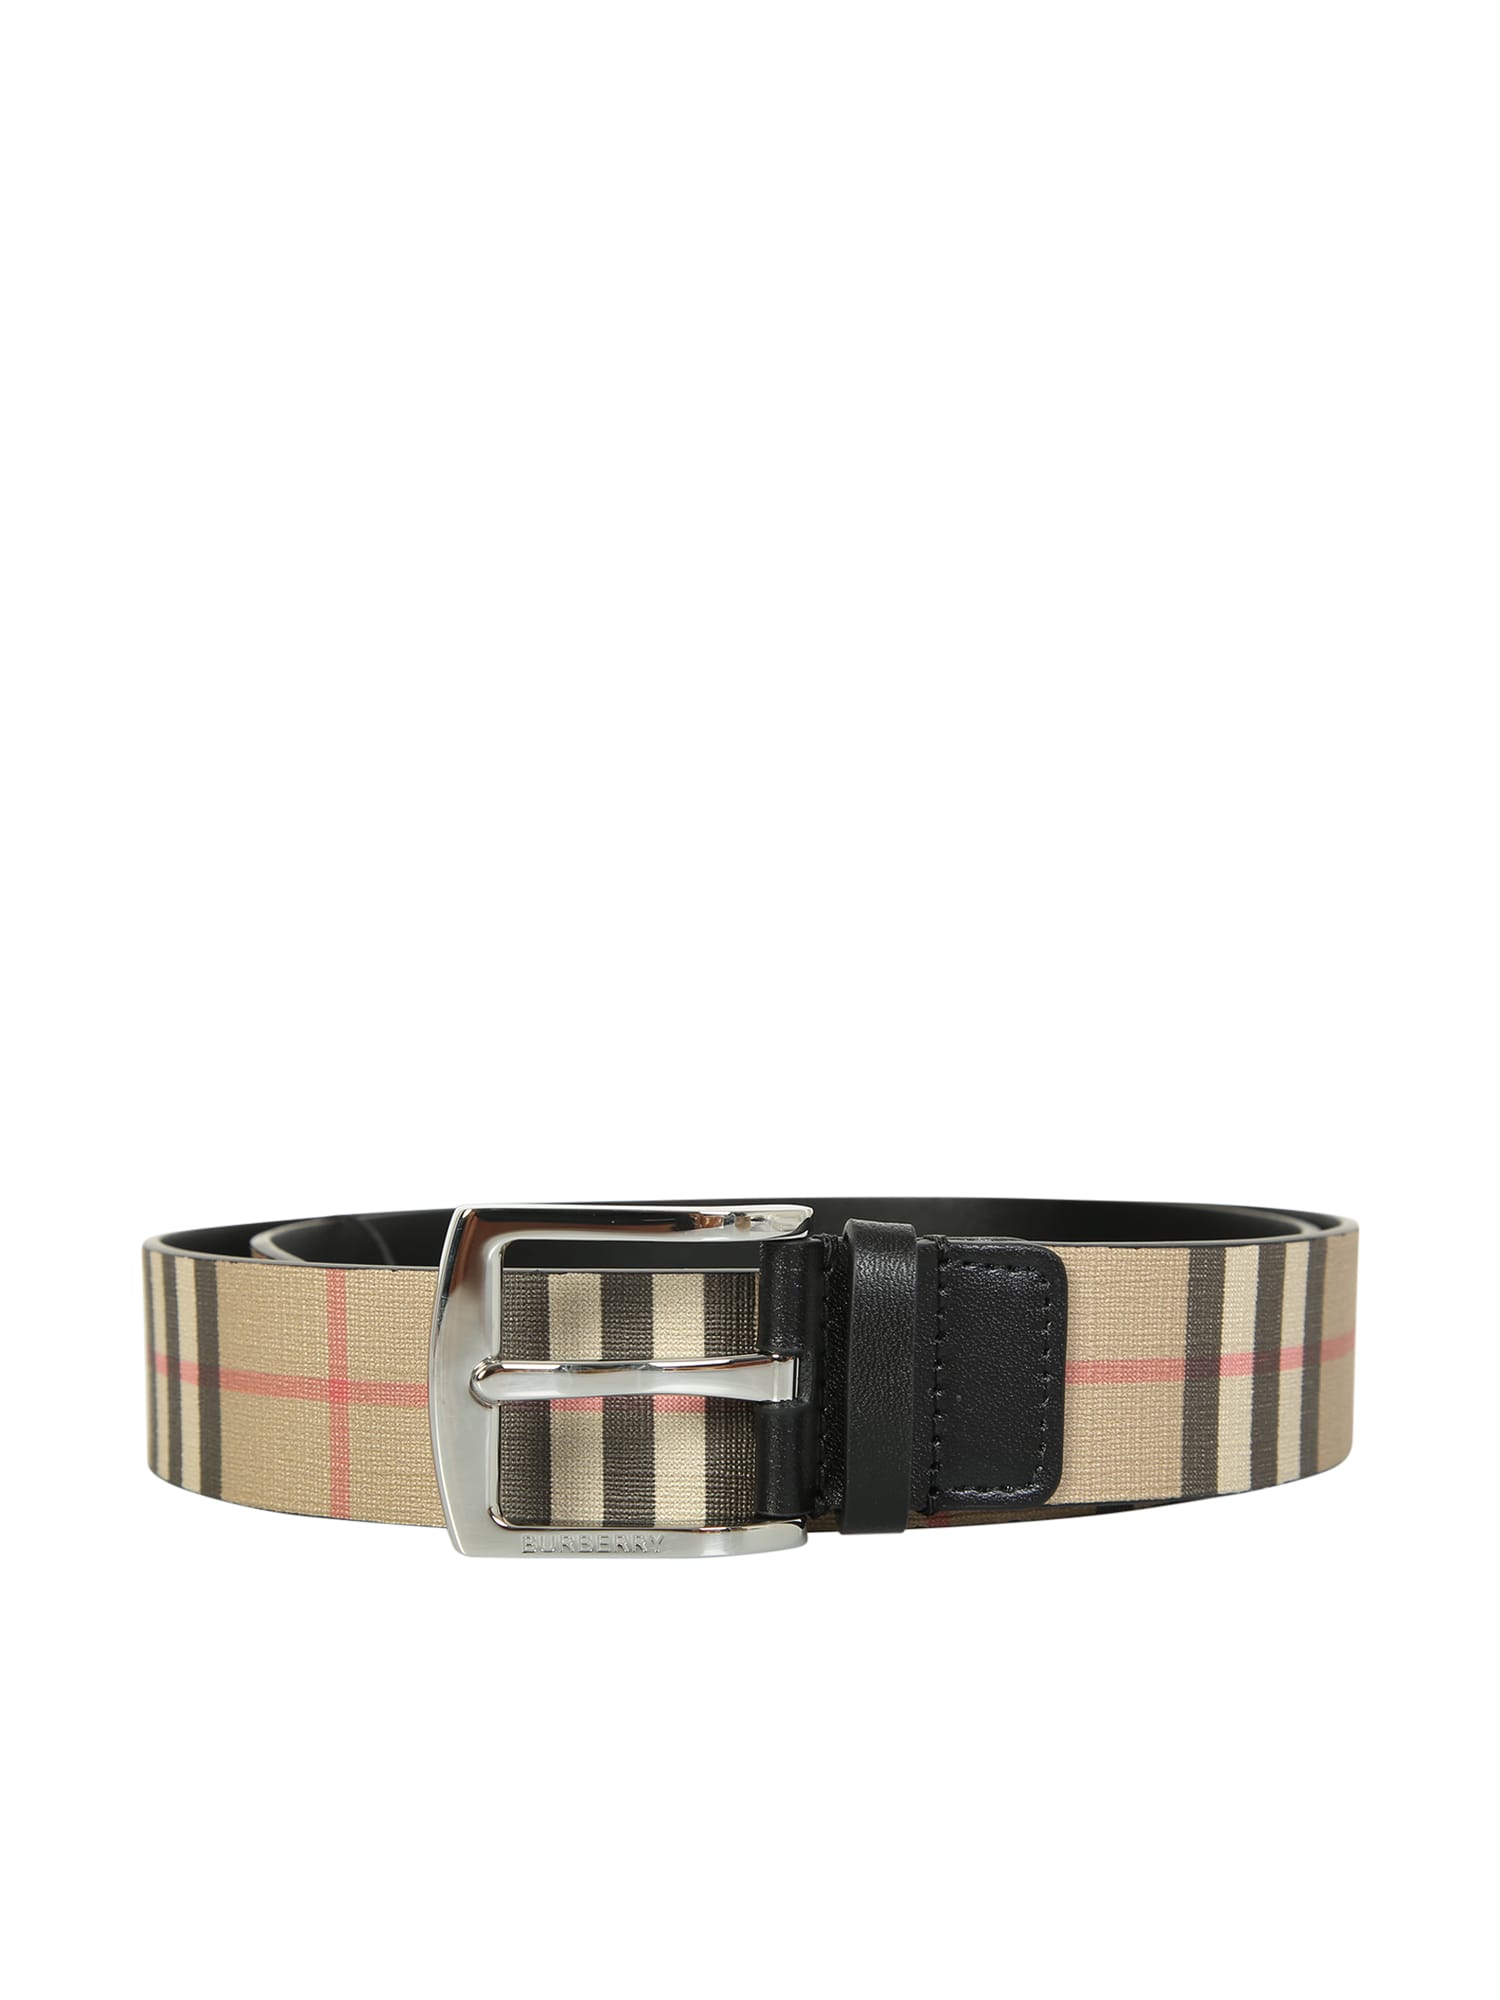 Burberry Vintage-check Belt By, For A Touch Of Elegance That Completes The Most Essential Outfits